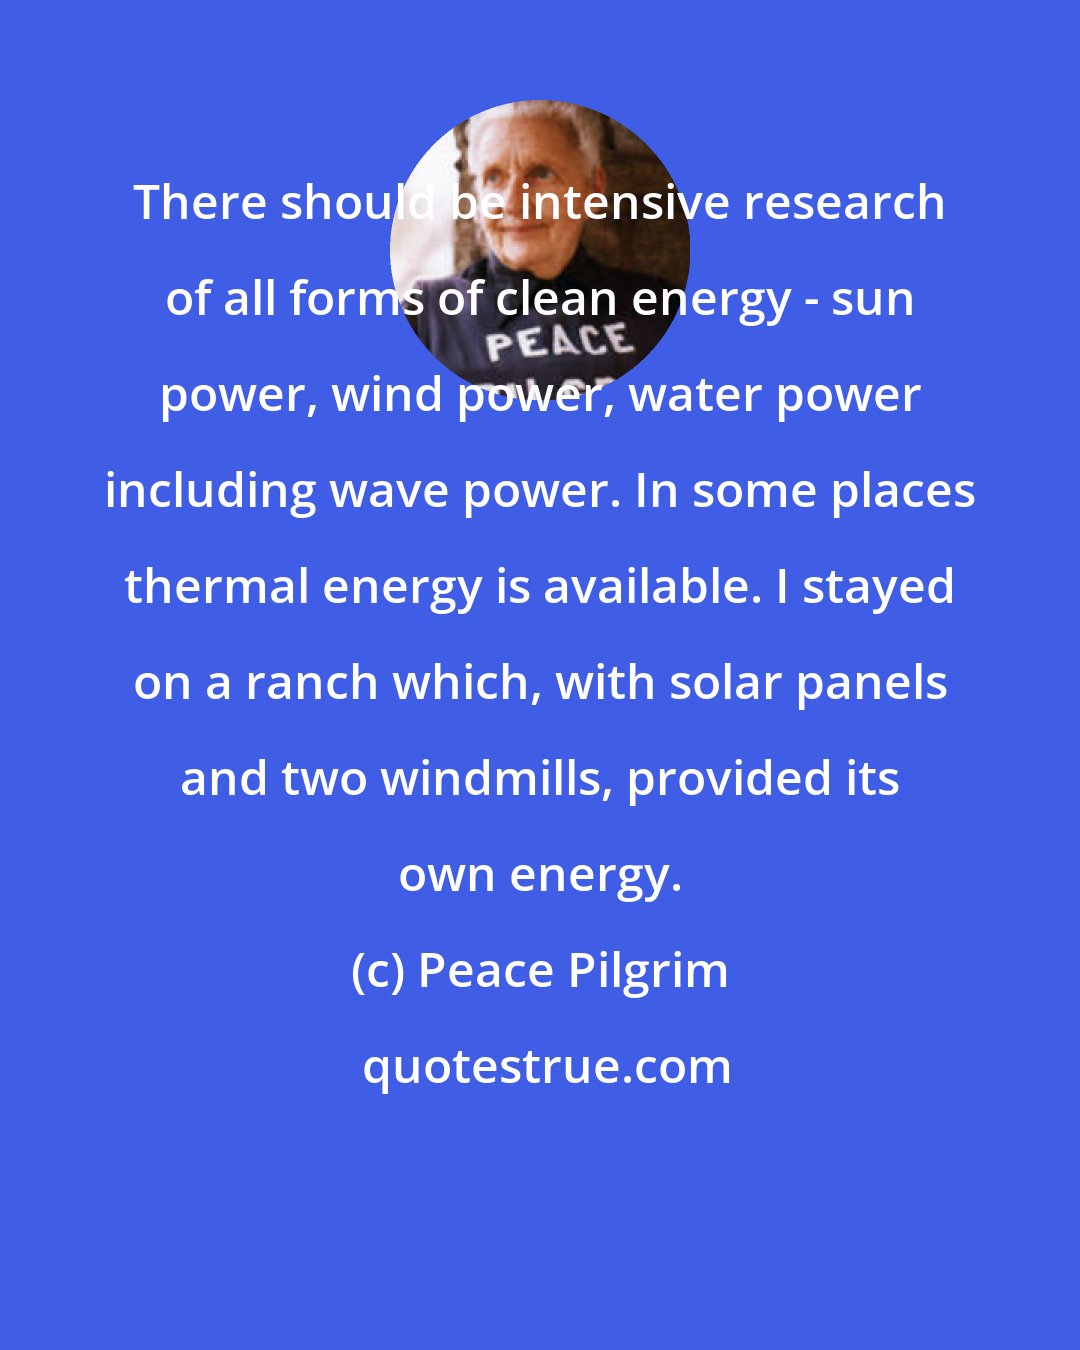 Peace Pilgrim: There should be intensive research of all forms of clean energy - sun power, wind power, water power including wave power. In some places thermal energy is available. I stayed on a ranch which, with solar panels and two windmills, provided its own energy.